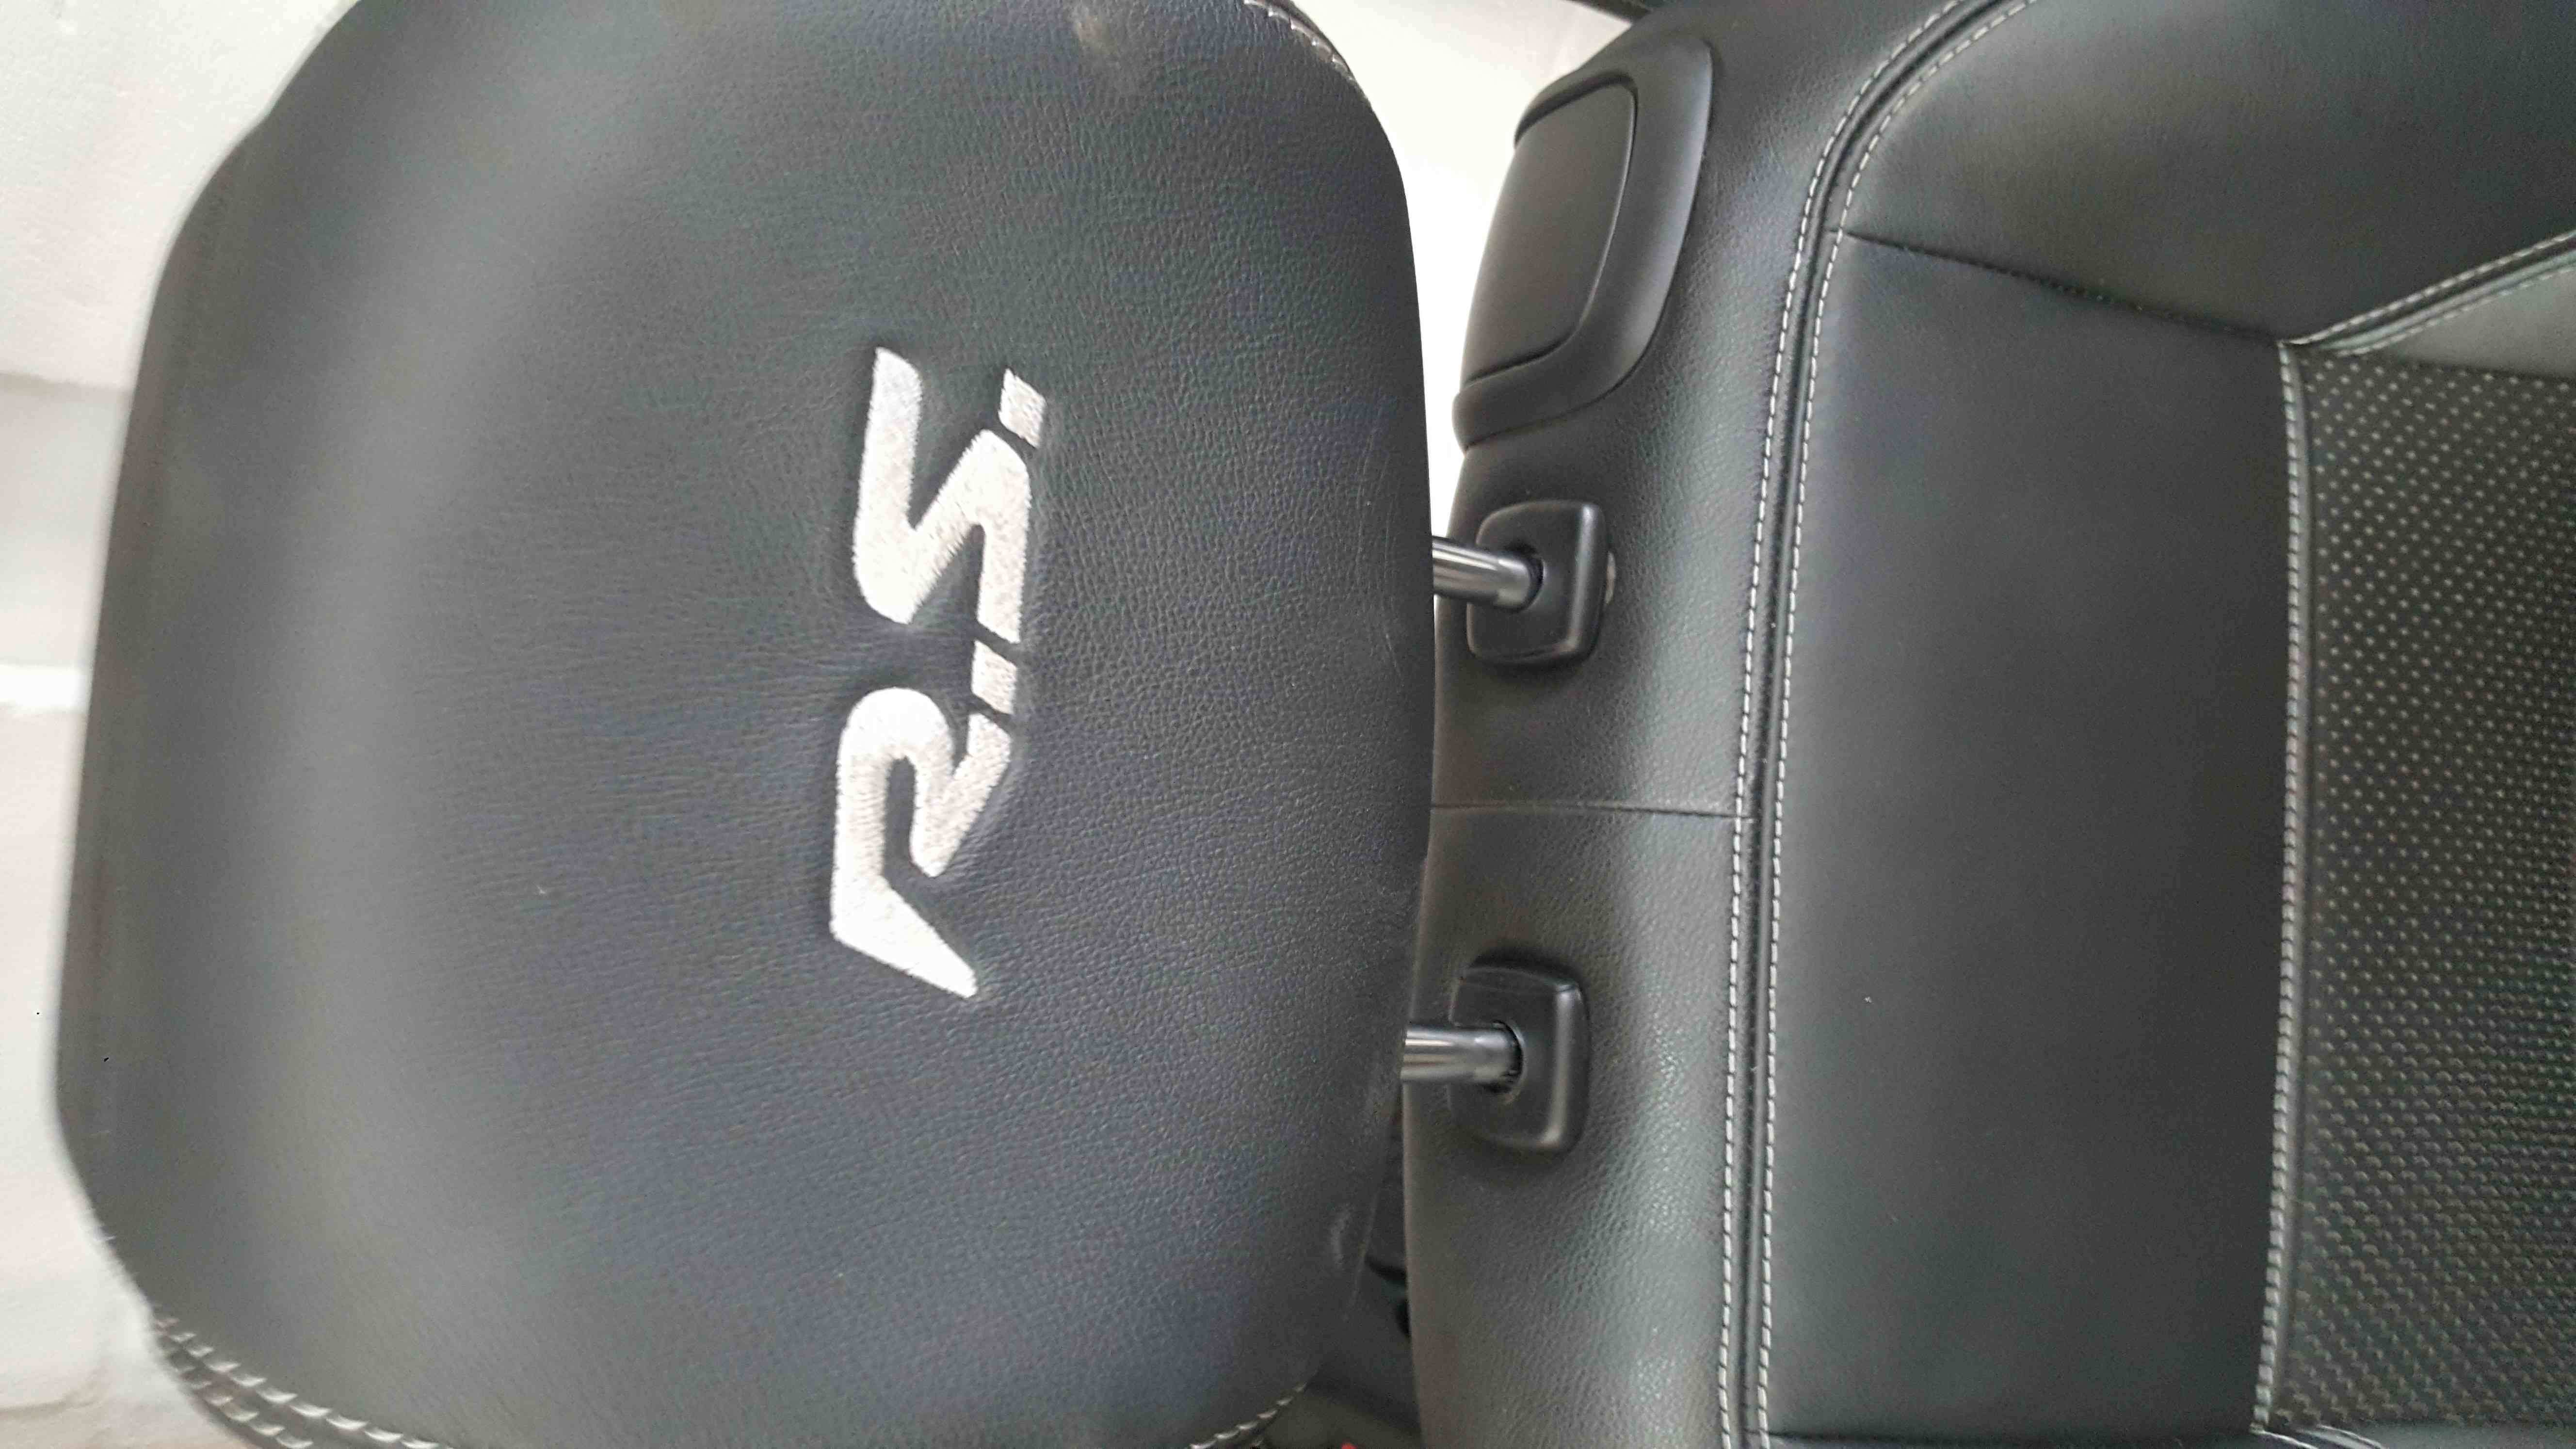 Renault Megane Coupe 2008-2014 Black Leather Interior SET Seats Chairs 3Dr Rs